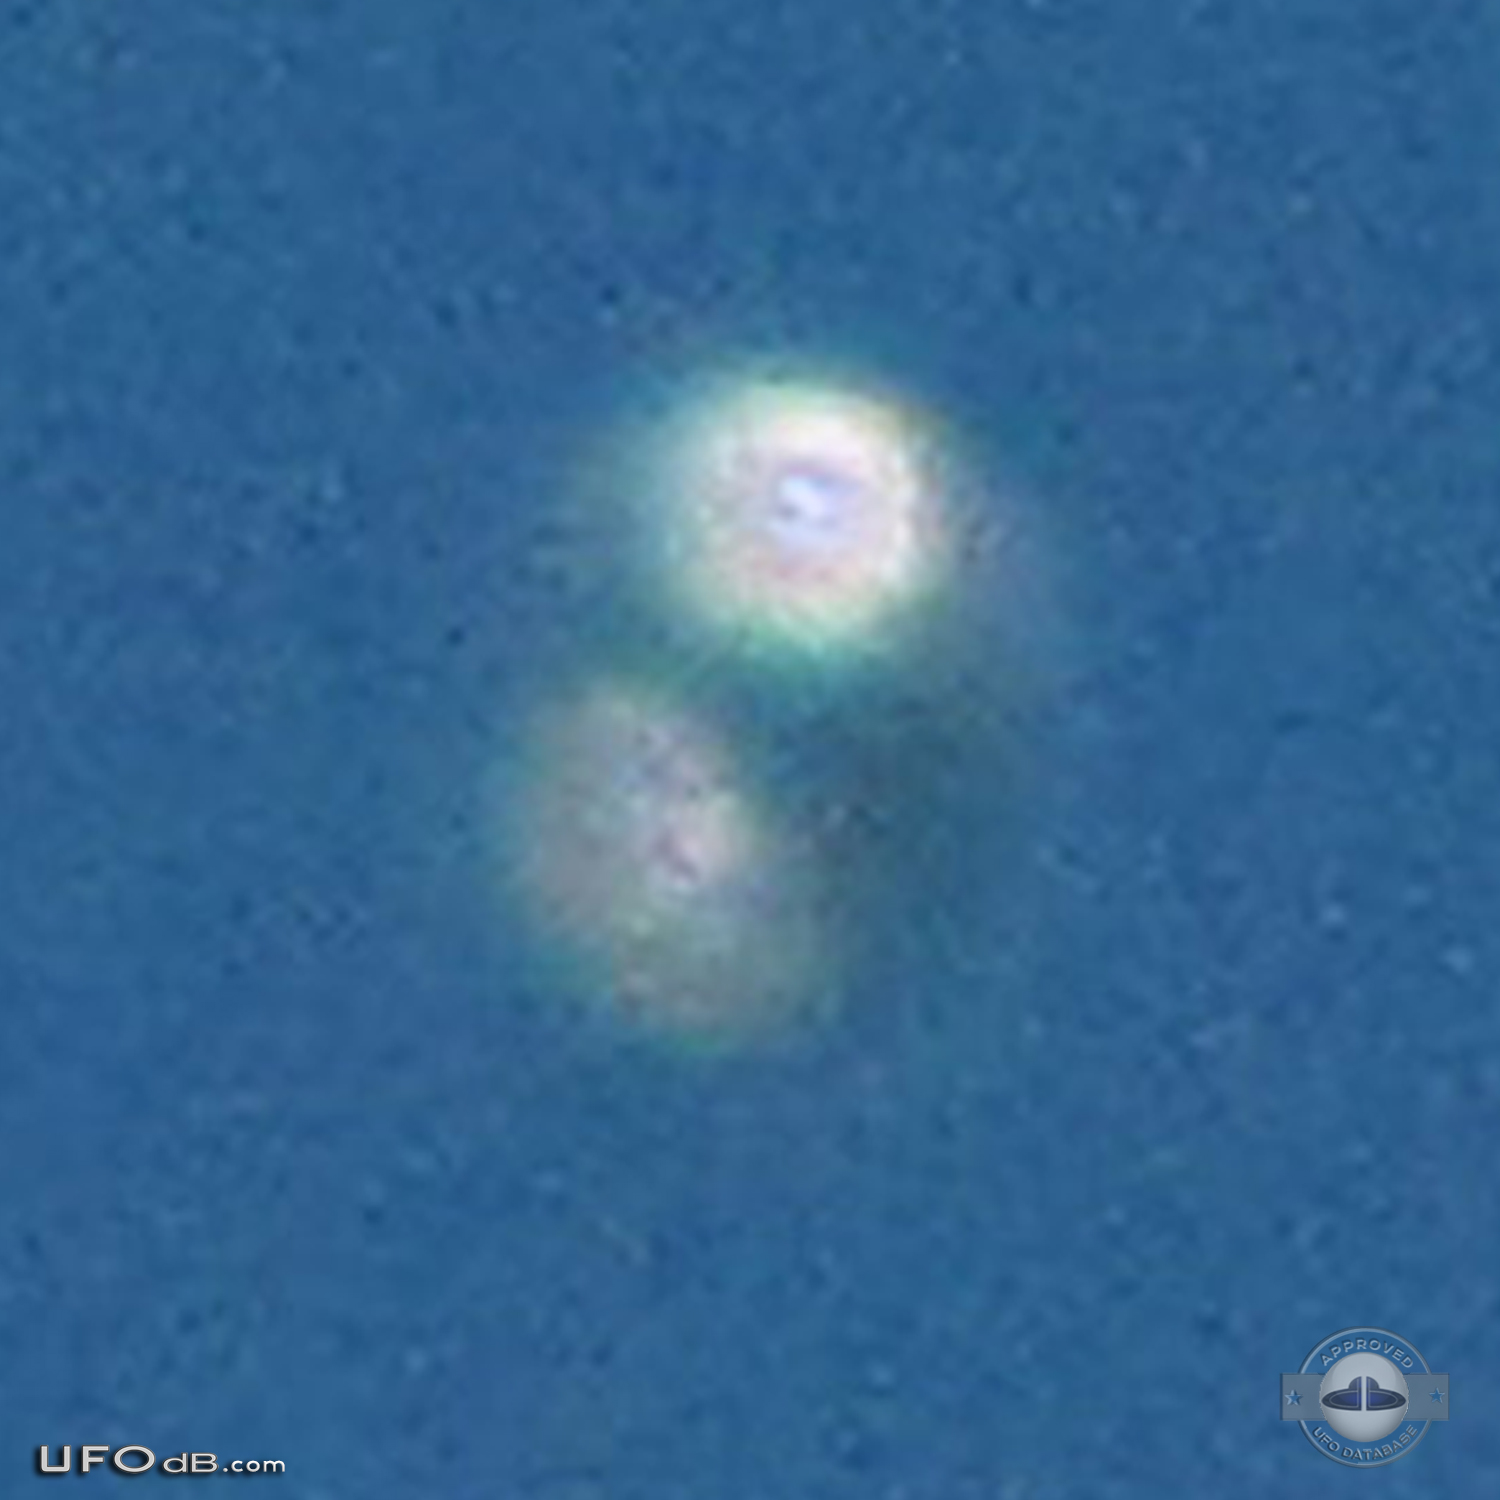 Donut shaped UFO with glowing silver material over Scituate Ma US 2012 UFO Picture #481-6